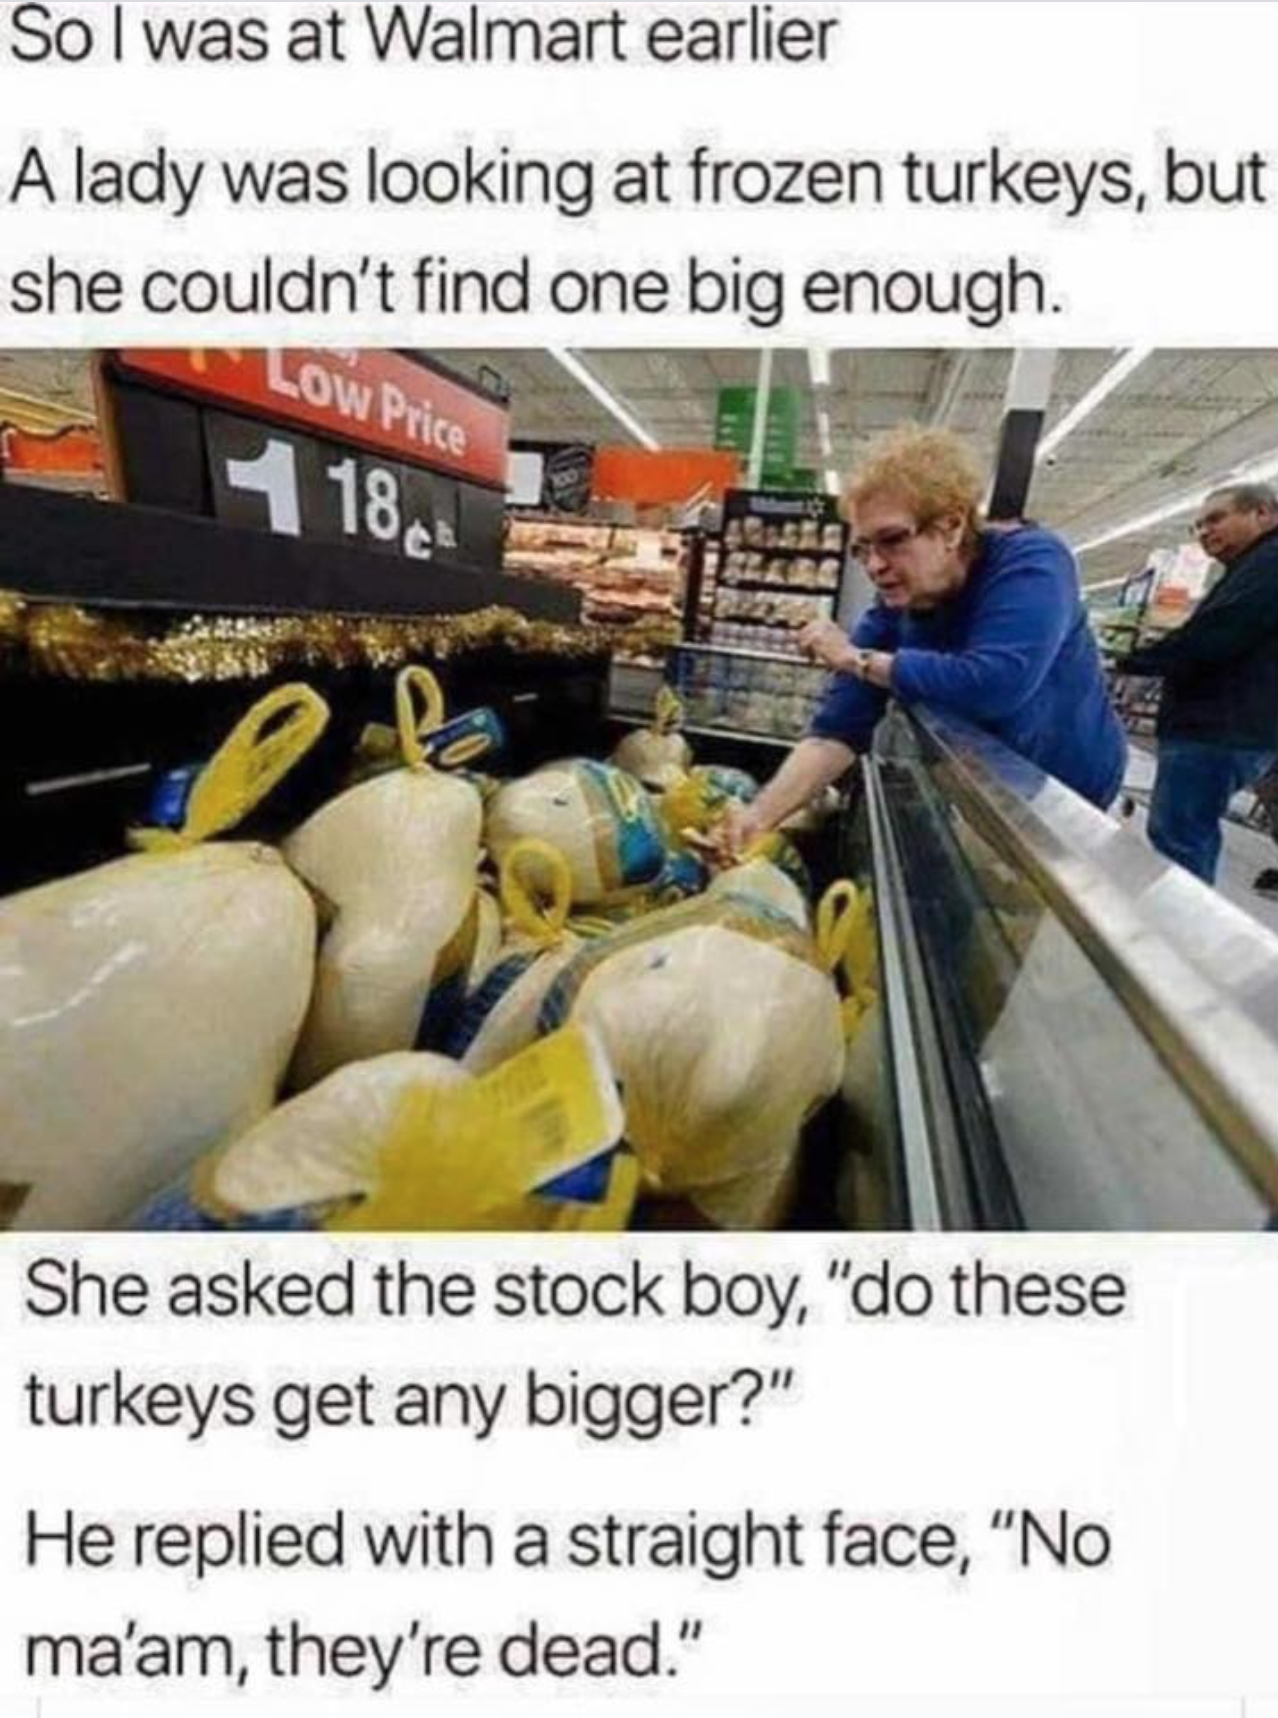 funny memes to share with friends - So I was at Walmart earlier A lady was looking at frozen turkeys, but she couldn't find one big enough. Low Price 418 She asked the stock boy, "do these turkeys get any bigger?" He replied with a straight face, "No ma'a